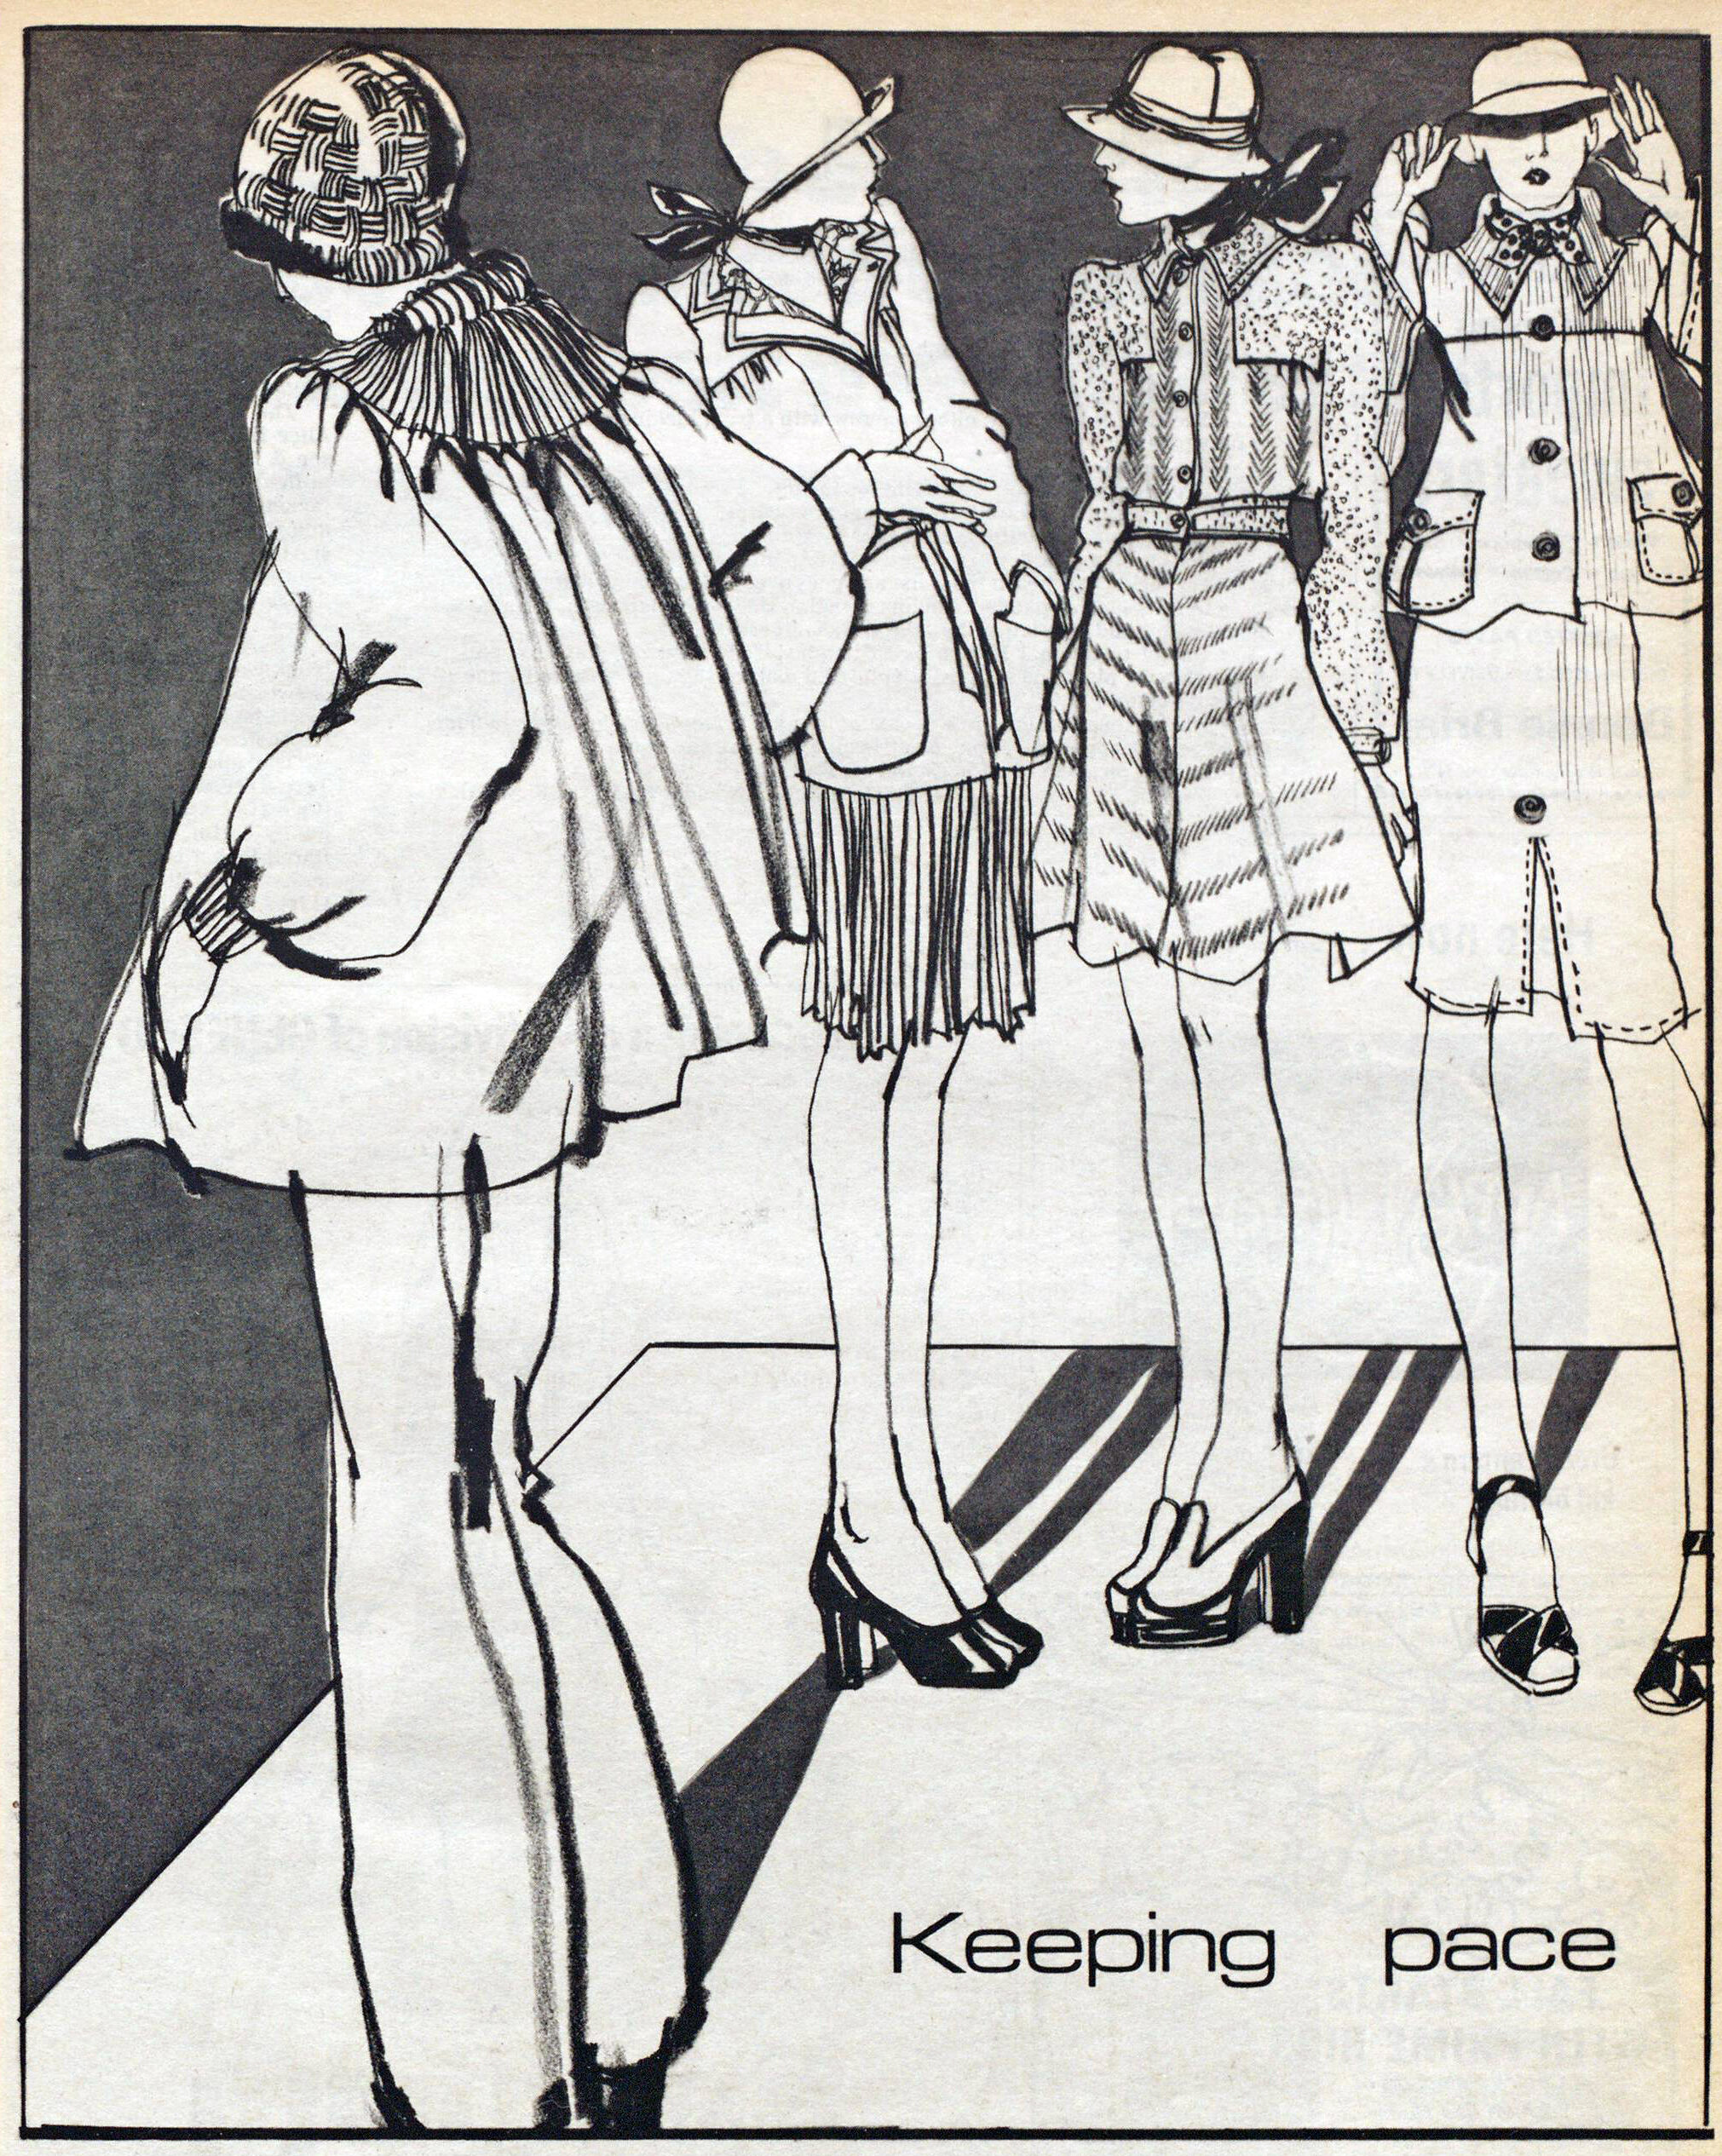 Third from left, Tere Tereba for Tootique. Women’s Wear Daily, May 2, 1973.